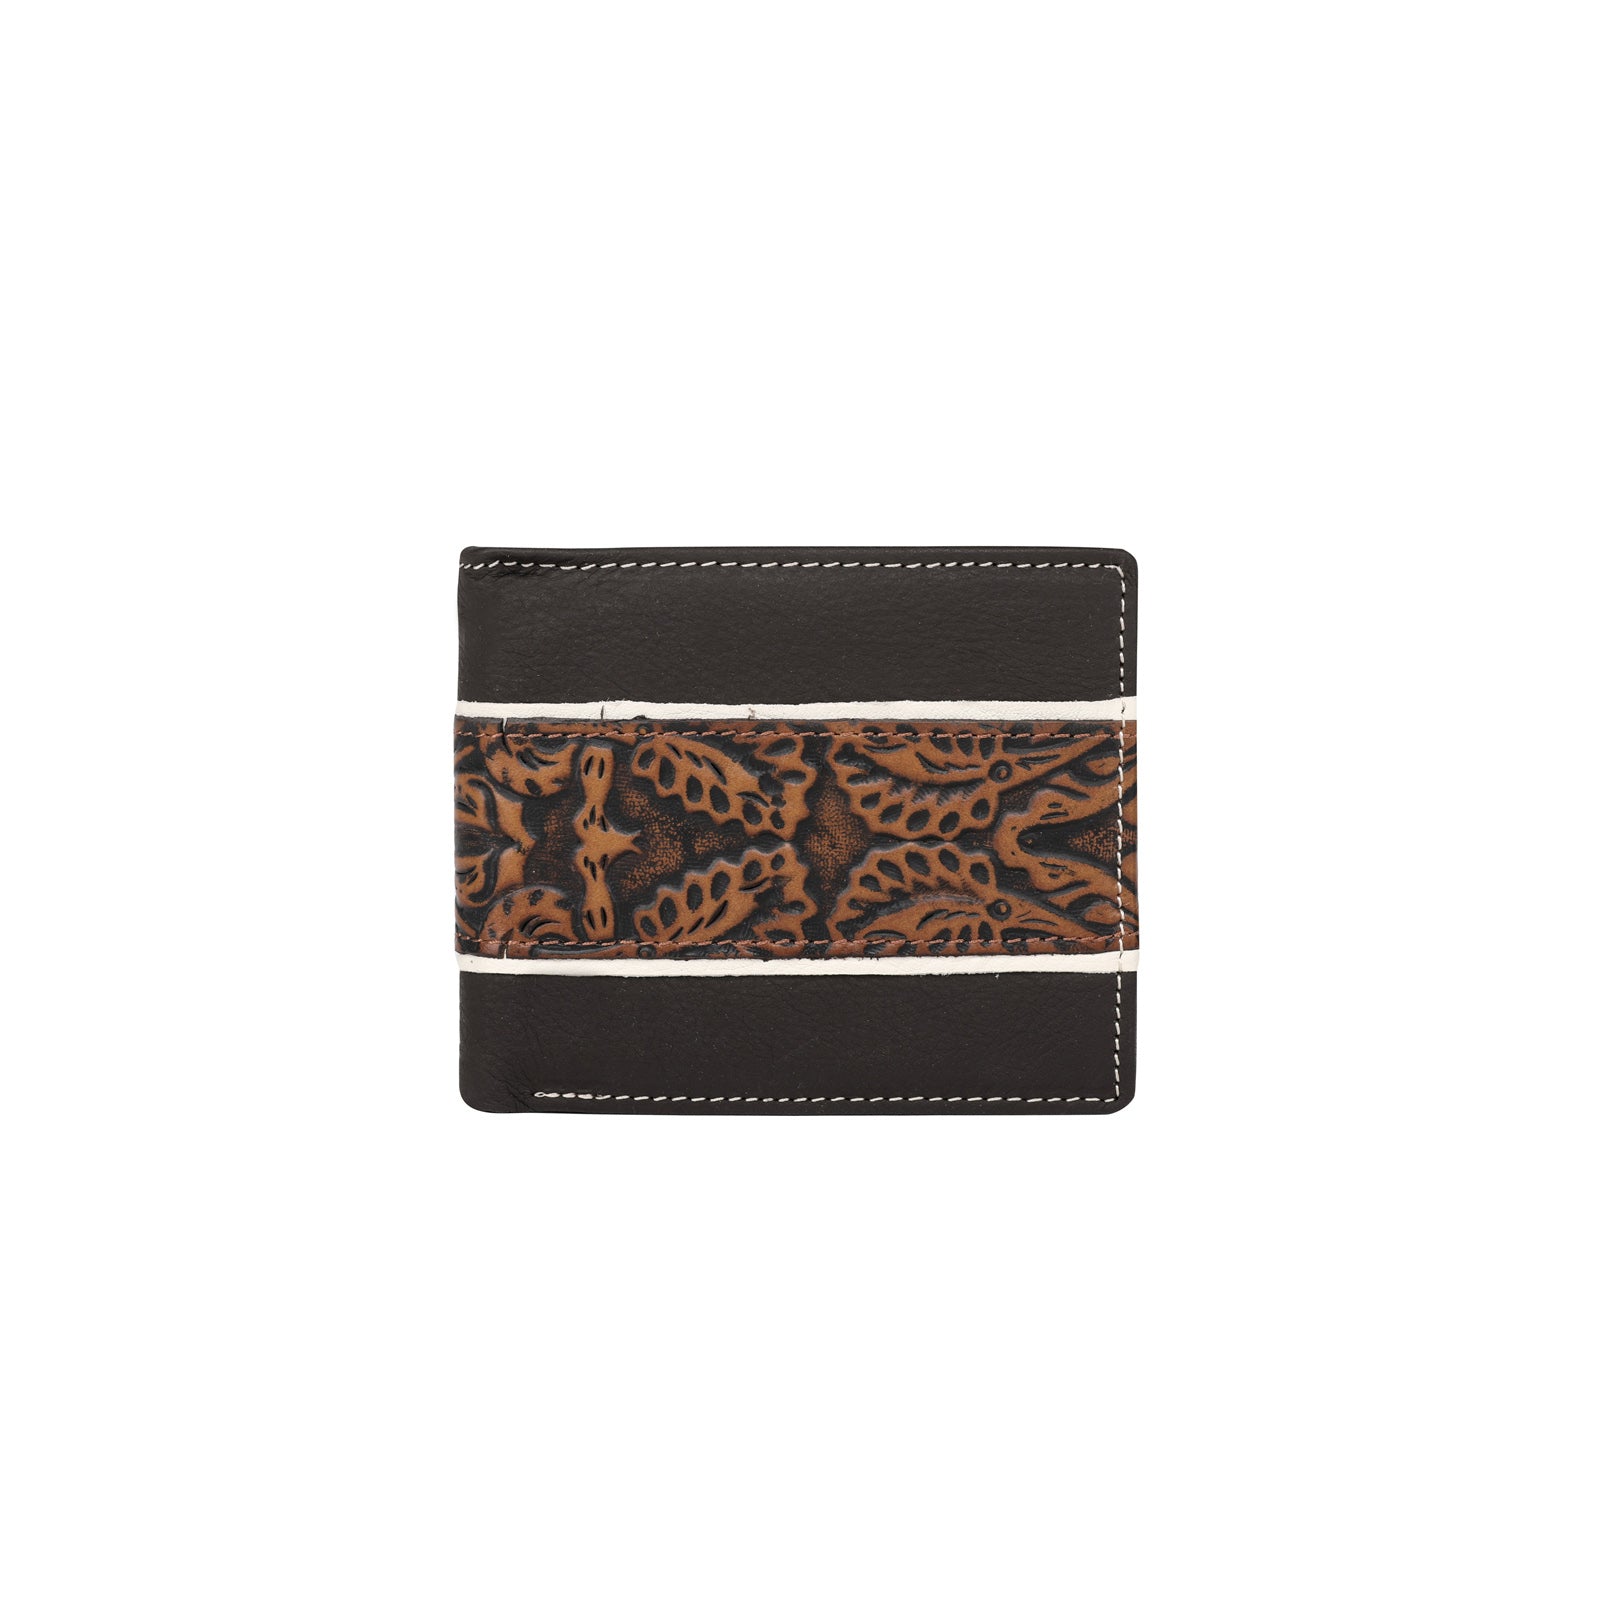 MWS-W010 Genuine Leather Embossed Floral Men's Wallet – MONTANA